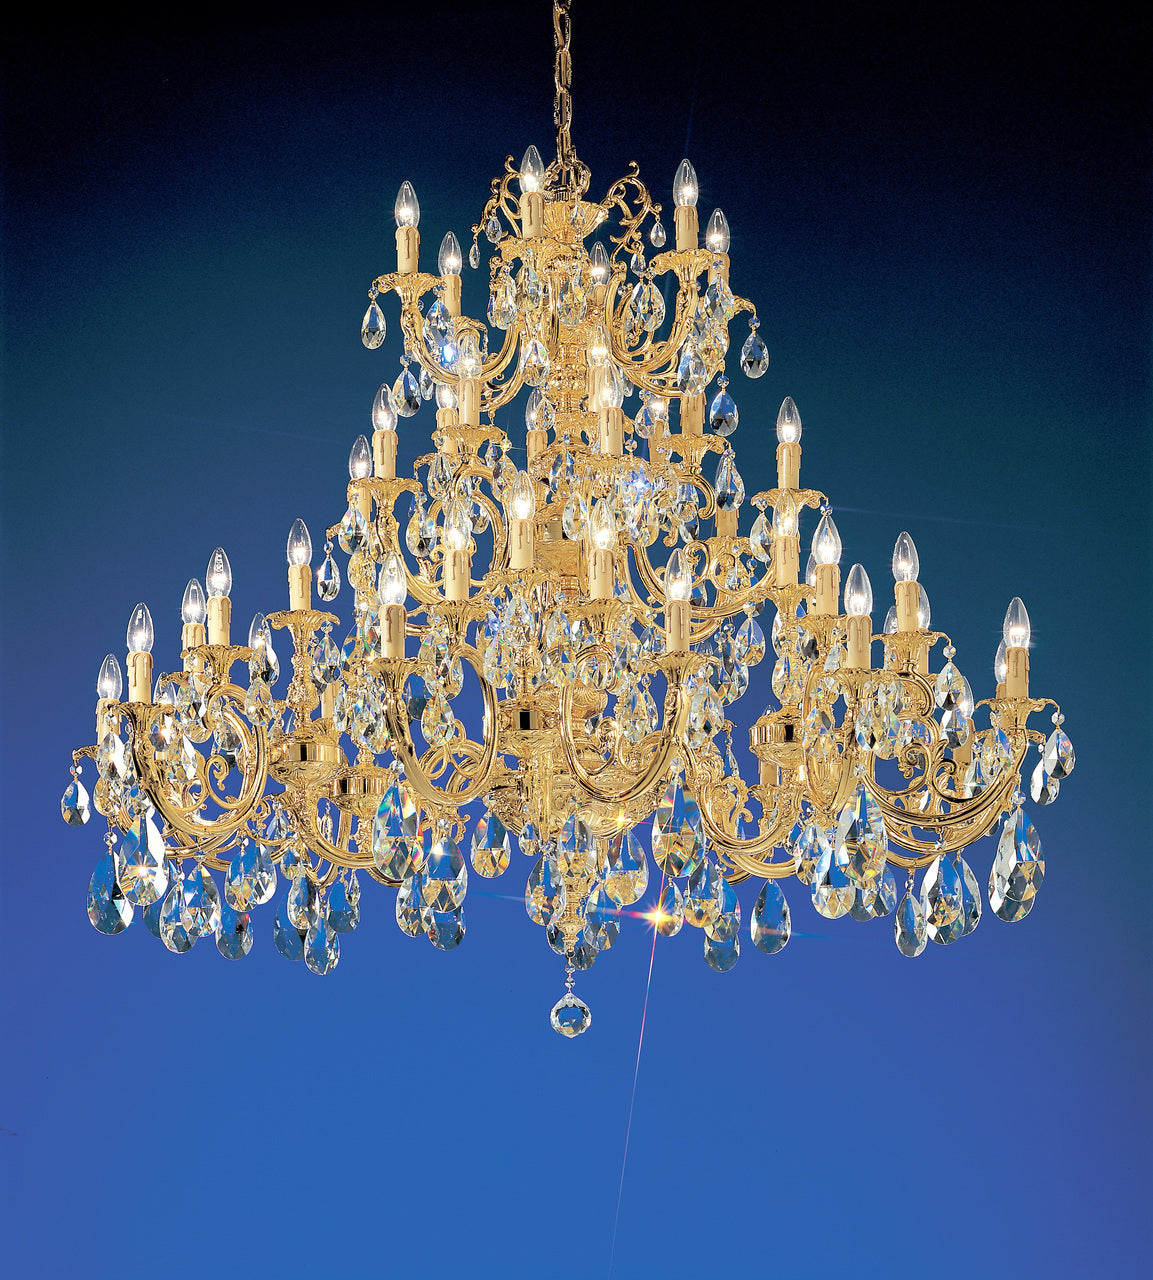 Classic Lighting 5748 G S Princeton Crystal/Cast Brass Chandelier in 24k Gold (Imported from Spain)